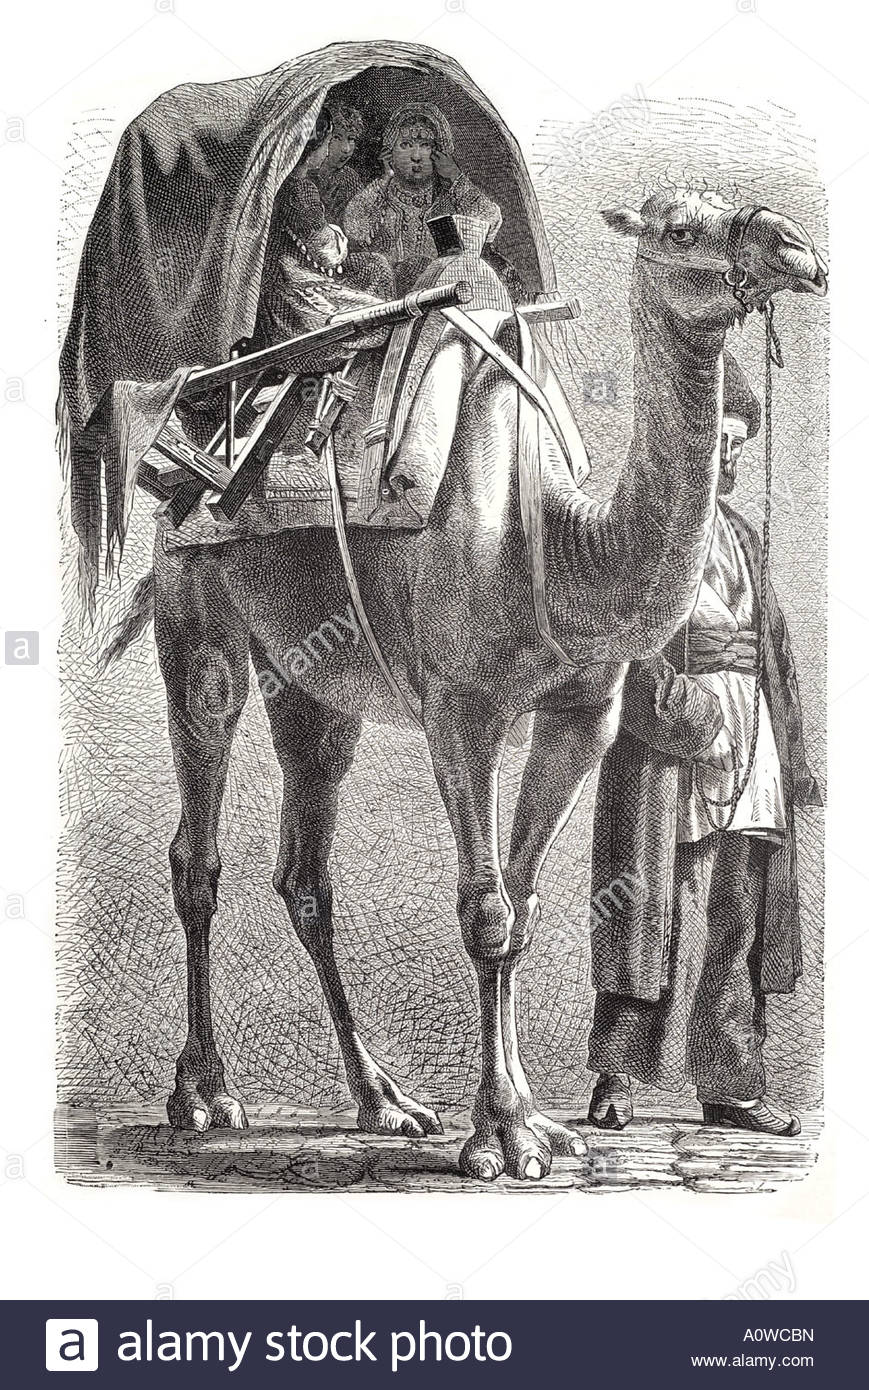 camel-caucasus-camel-transport-carry-covered-russia-persia-silk-route-A0WCBN.jpg